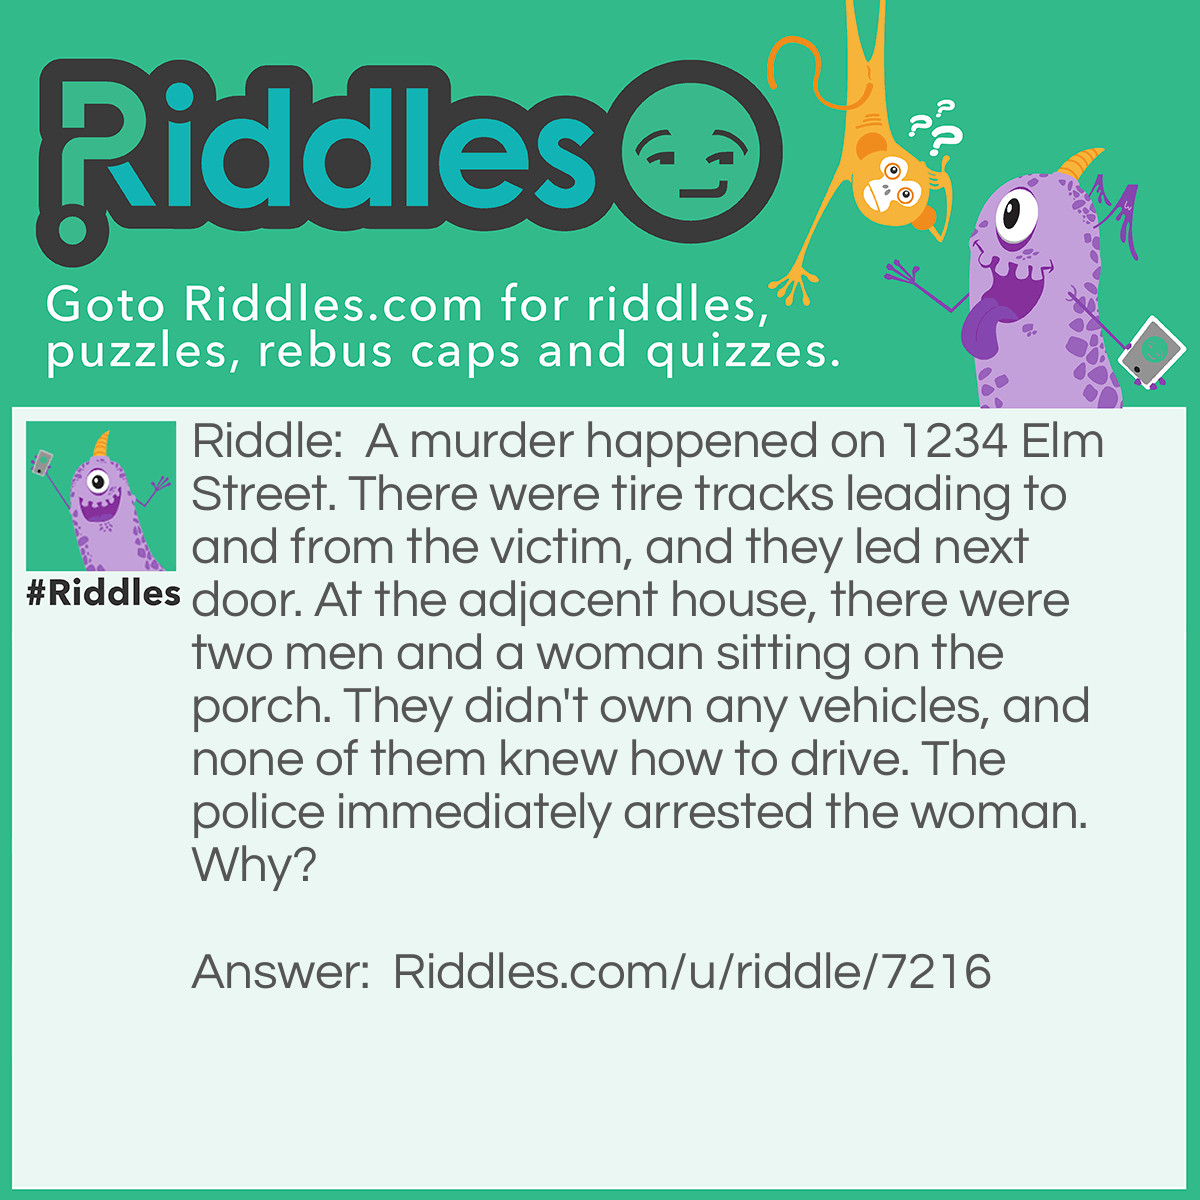 Riddle: A murder happened on 1234 Elm Street. There were tire tracks leading to and from the victim, and they led next door. At the adjacent house, there were two men and a woman sitting on the porch. They didn't own any vehicles, and none of them knew how to drive. The police immediately arrested the woman. Why? Answer: The woman was in a wheelchair.